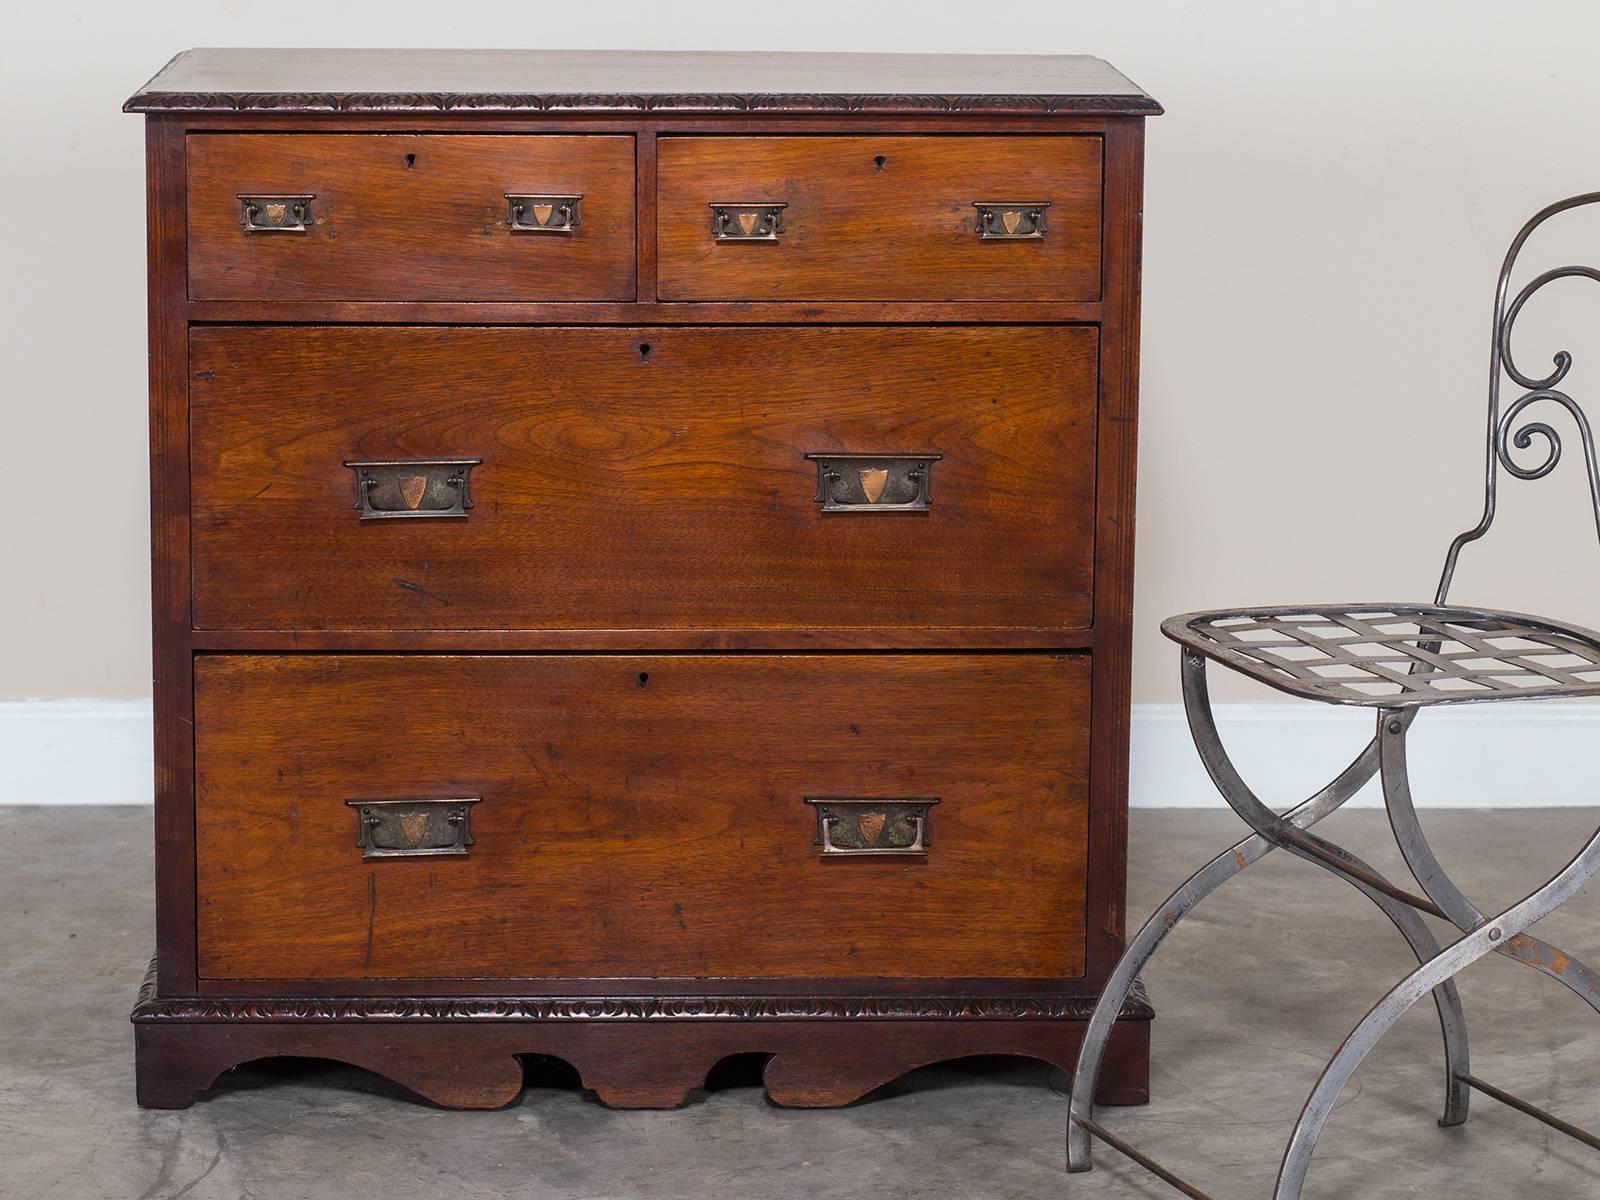 Receive our new selections direct from 1stdibs by email each week. Please click “Follow Dealer” button below and see them first!

The handsome profile of this antique English mahogany chest of drawers, circa 1890. Displays the distinctive